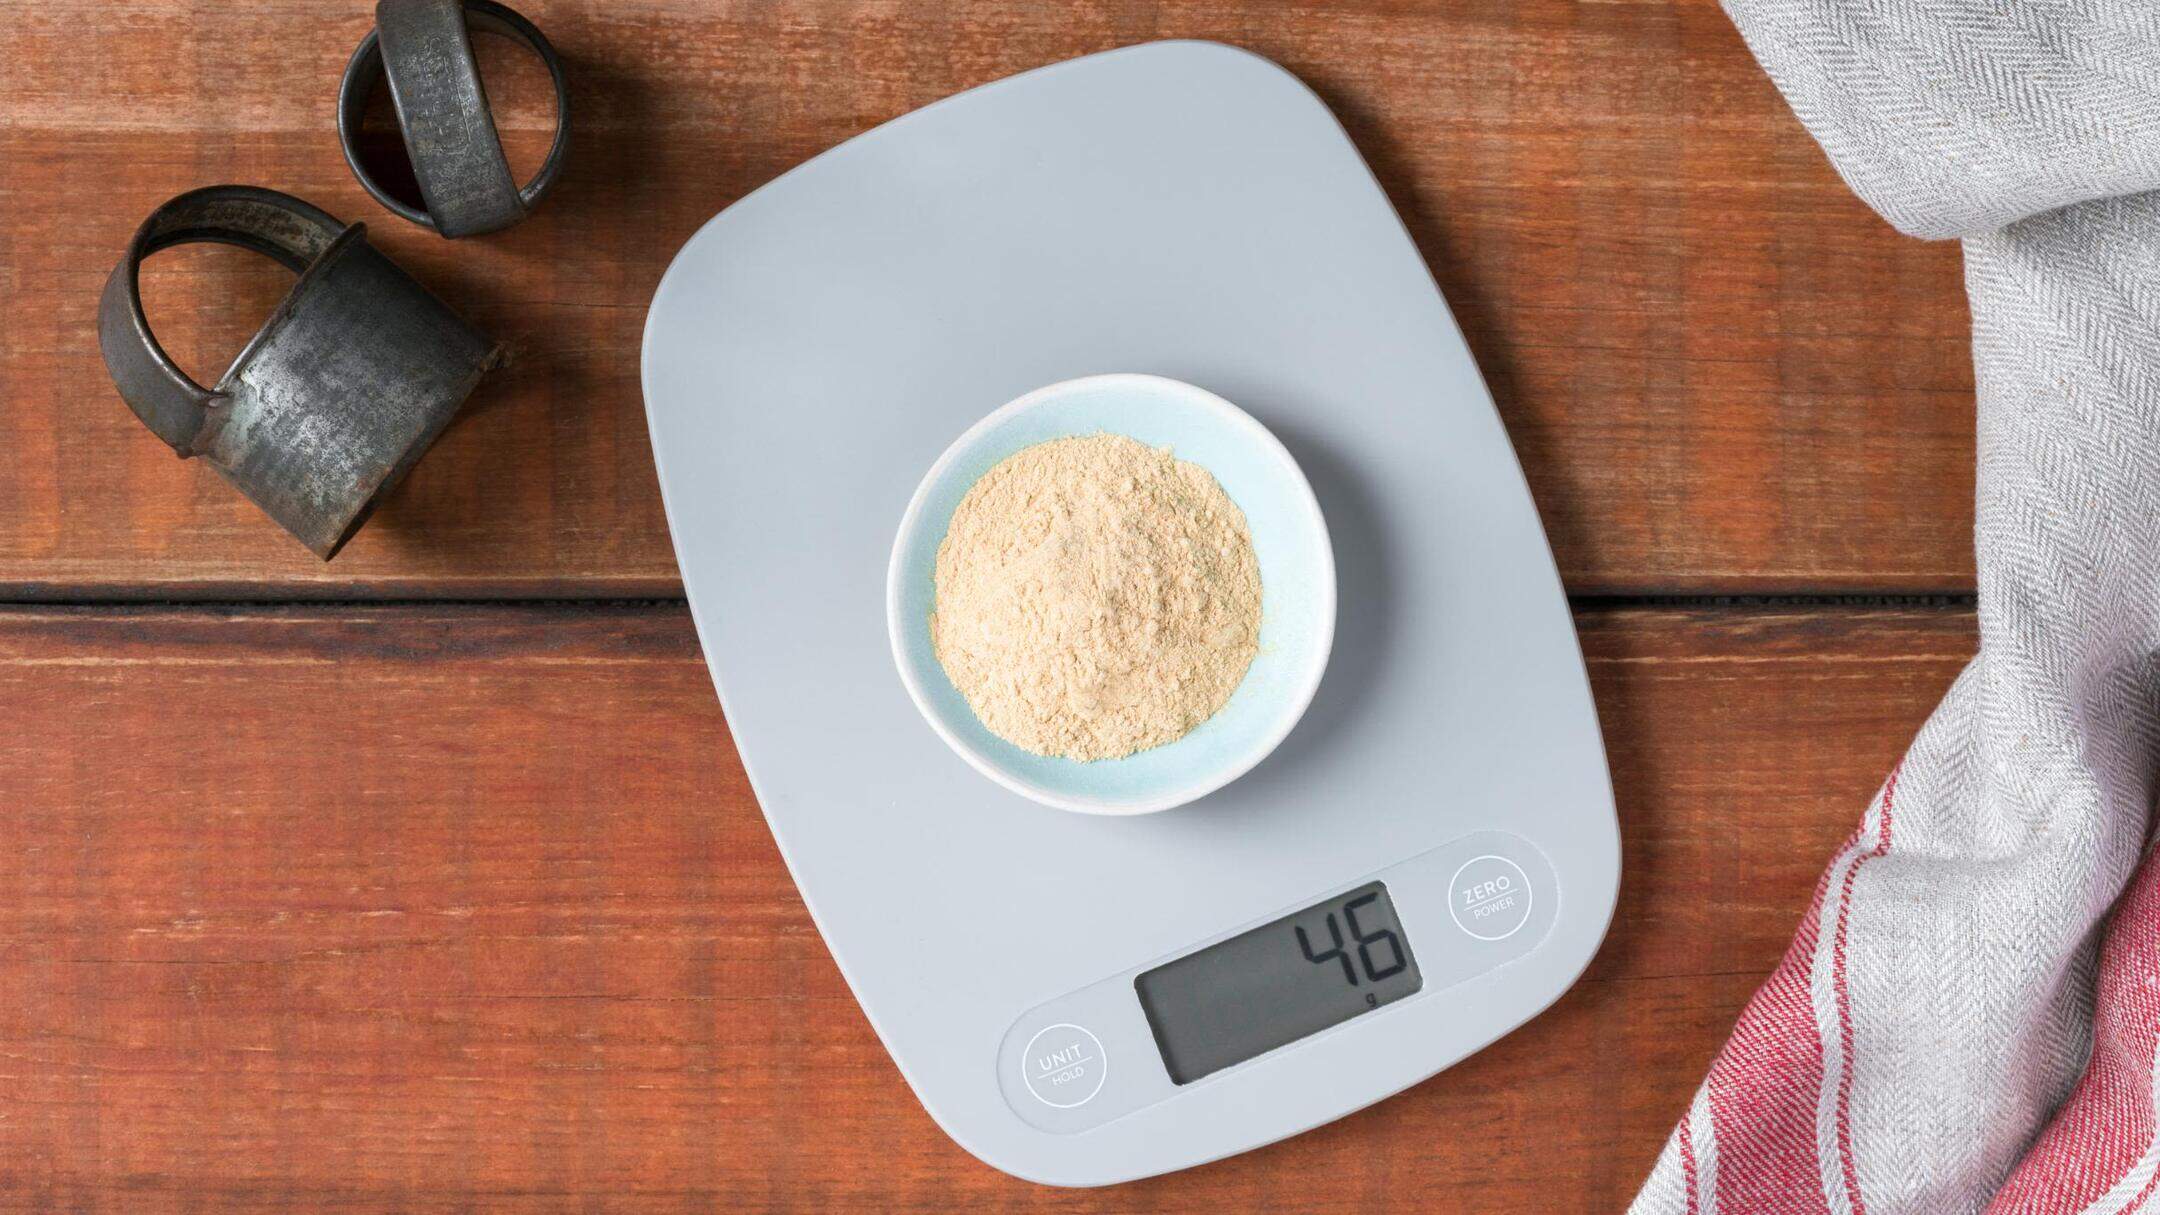 Digital Food Scale Review: Accurate and Convenient